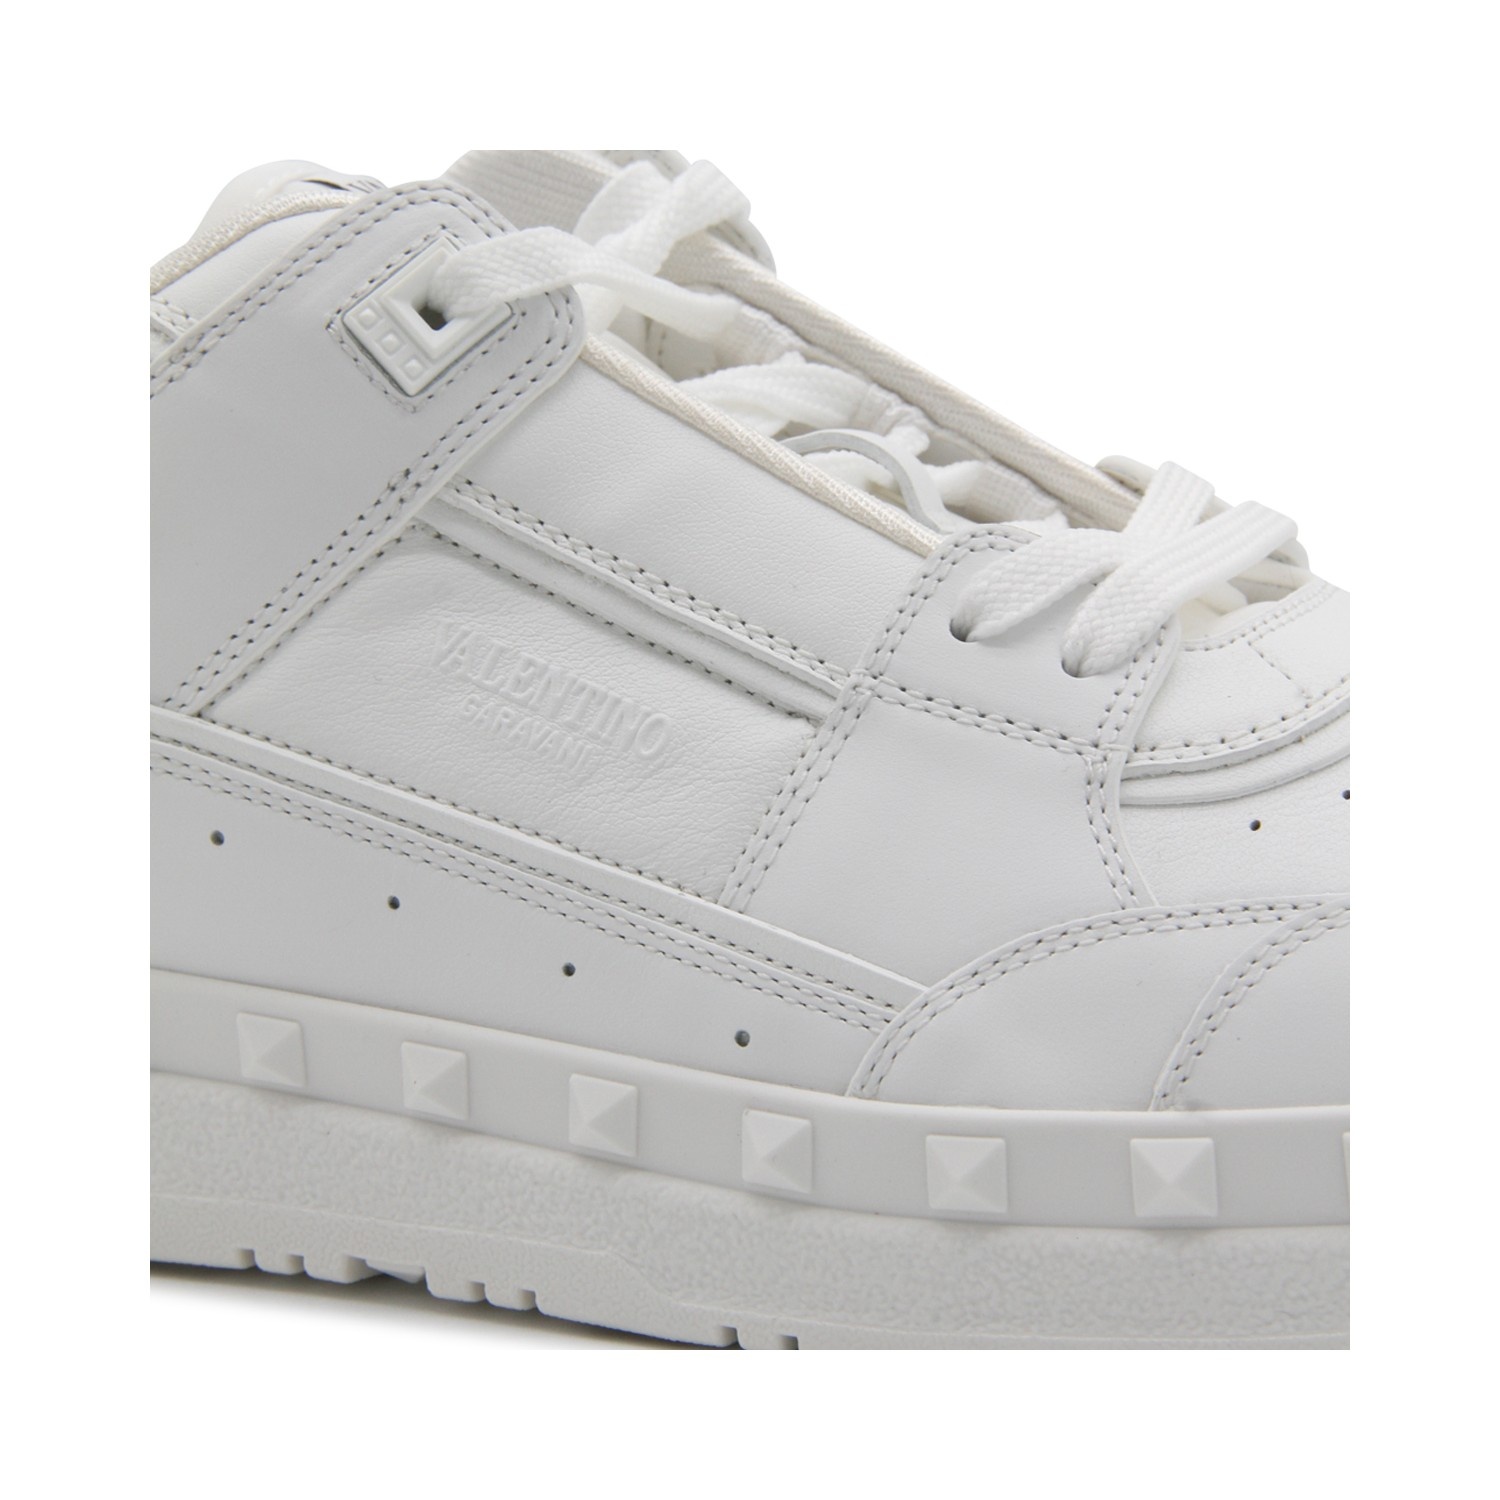 WHITE LEATHER FREEDOTS SNEAKERS - 4